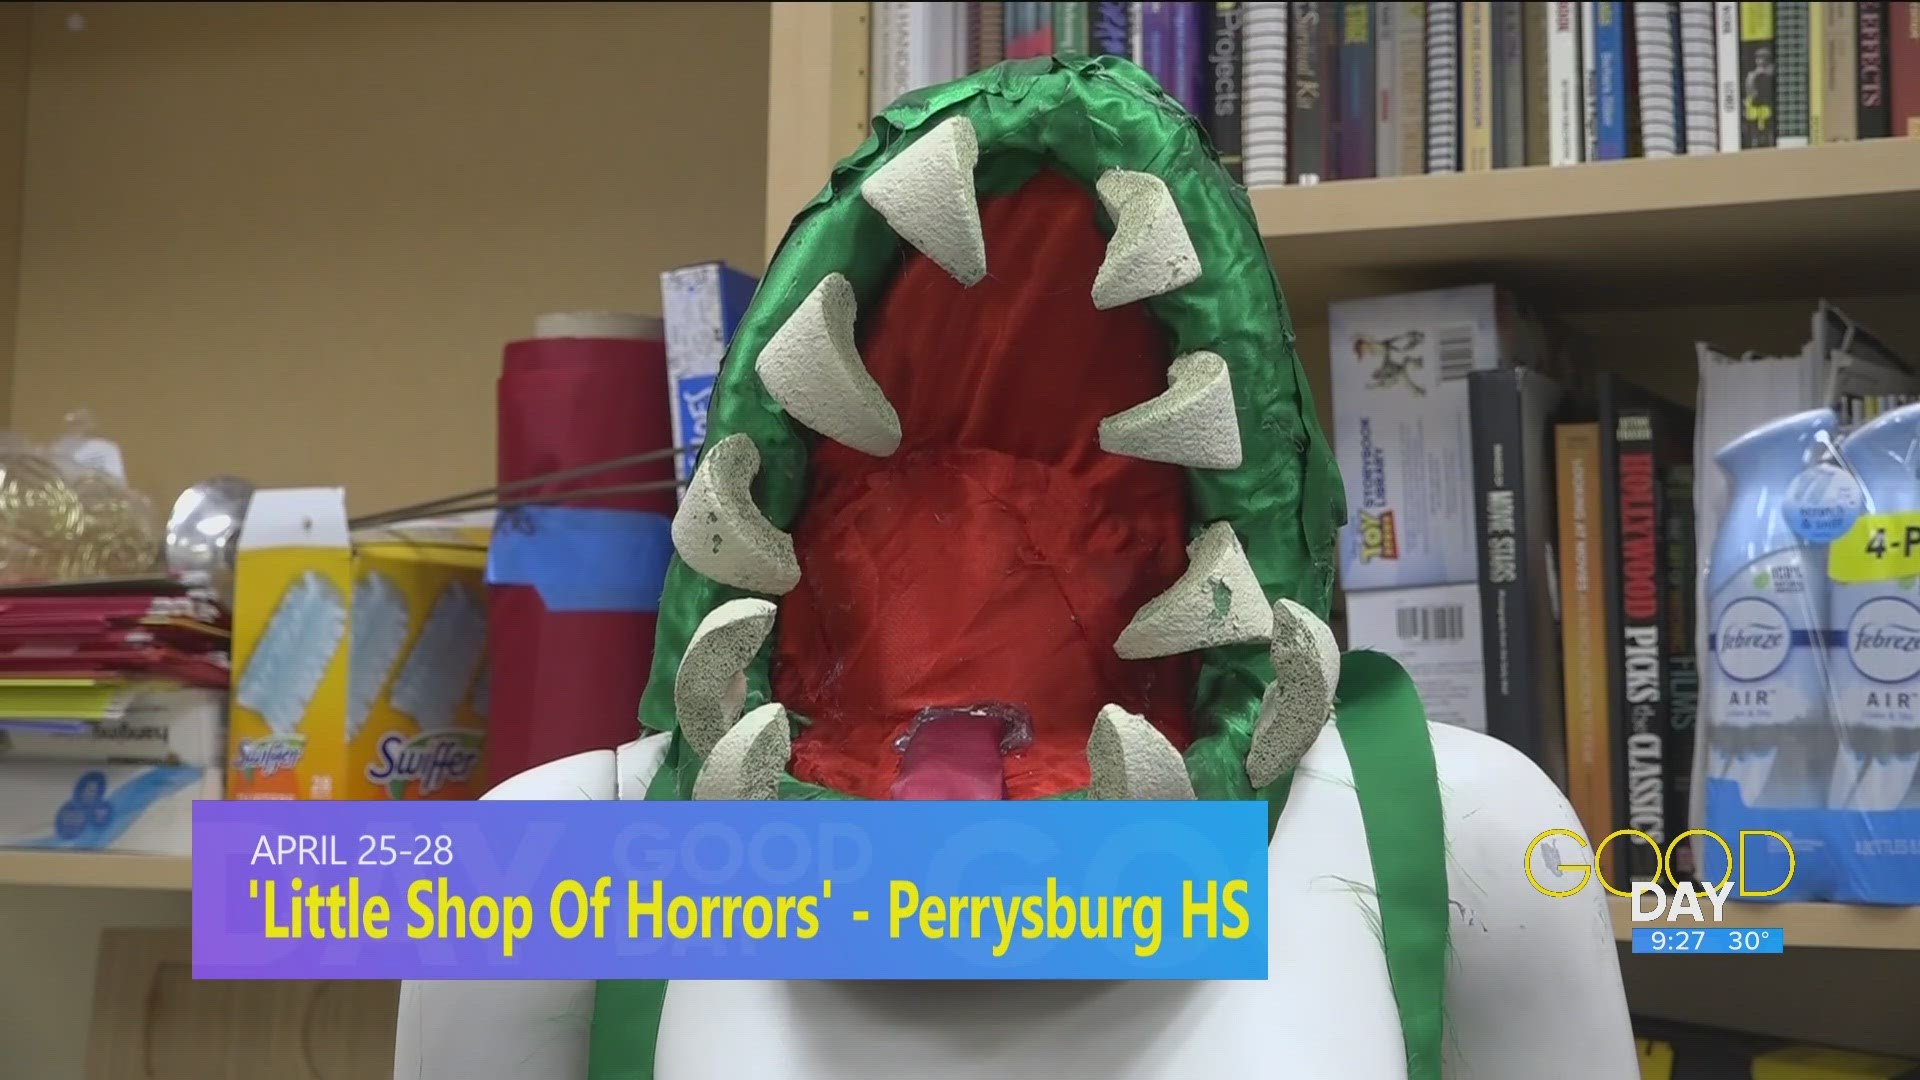 Perrysburg High School is staging 'Little Shop of Horrors' from April 25 to April 28.